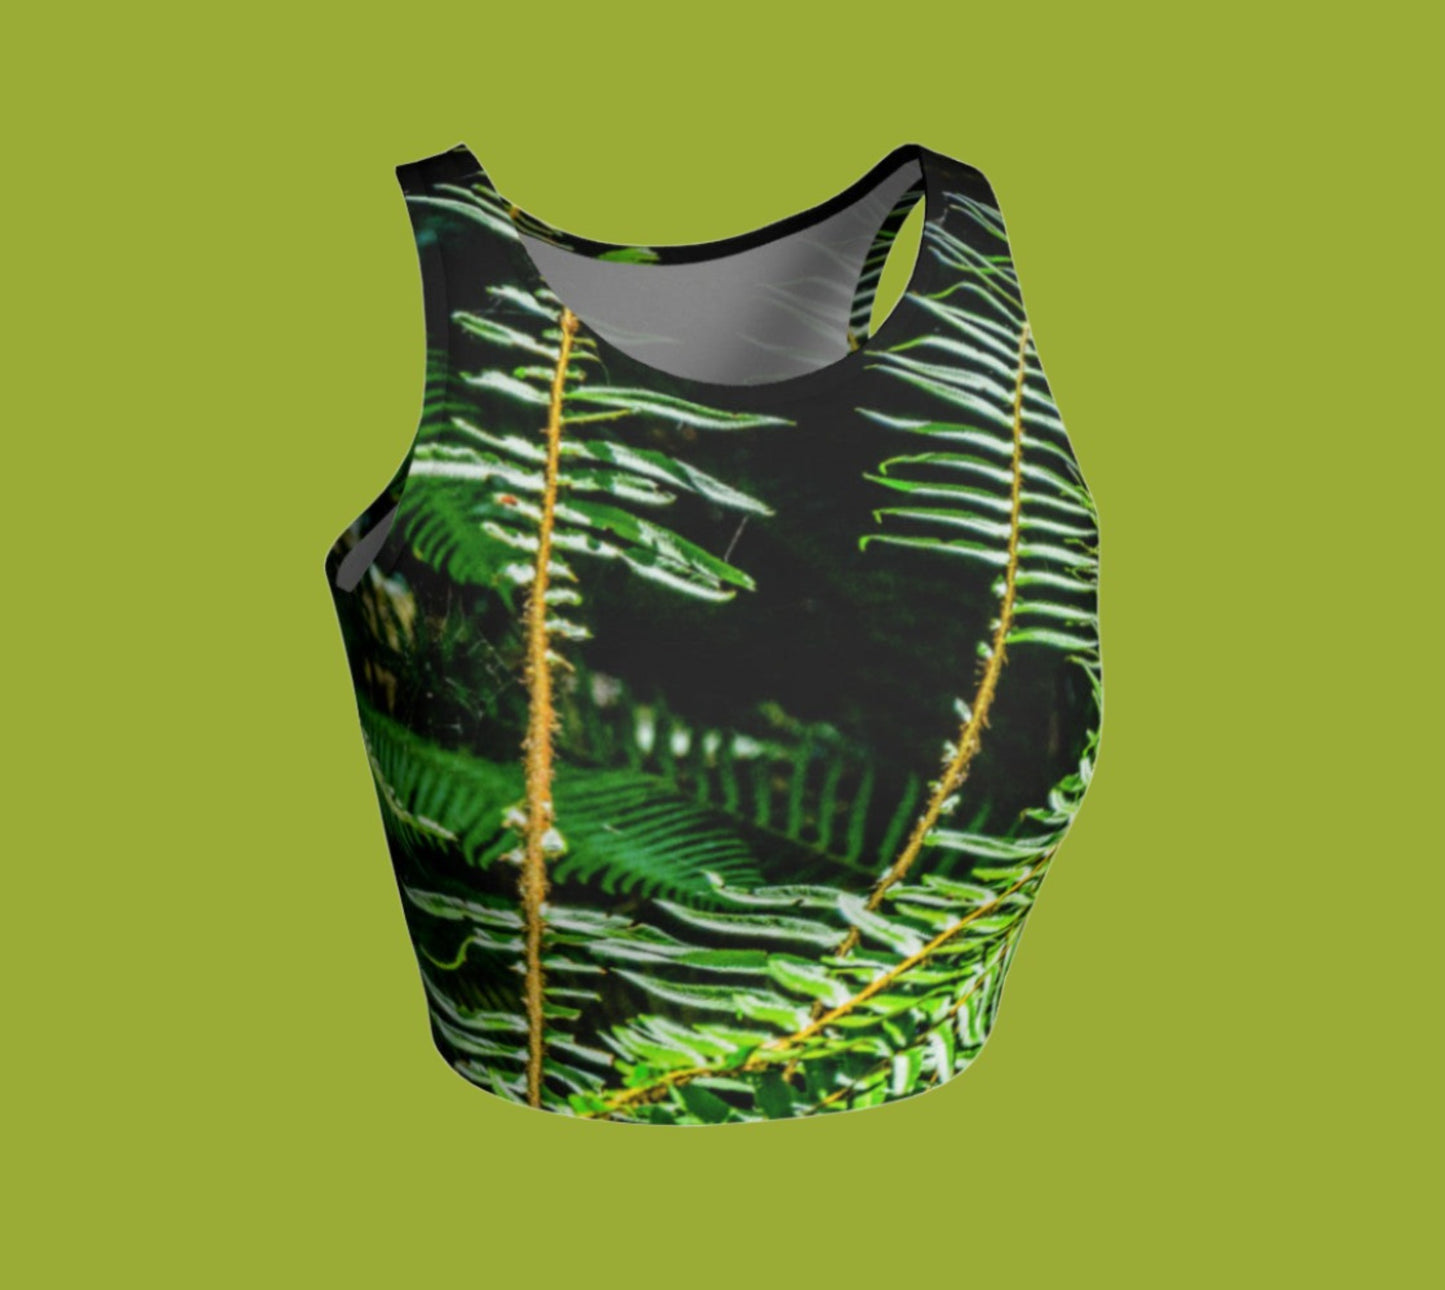 Rainforest Athletic Crop Top  Rainforest artwork by Roxy Hurtubise   Made to move with you!  Wear for your daily workouts, yoga, beach volleyball or as a bathing suit top!  Your Van Isle Goddess athletic crop top pairs up with our yoga or classic leggings and capris. Crop tops also look great with shorts, mini shorts, skirts fitted or flared.